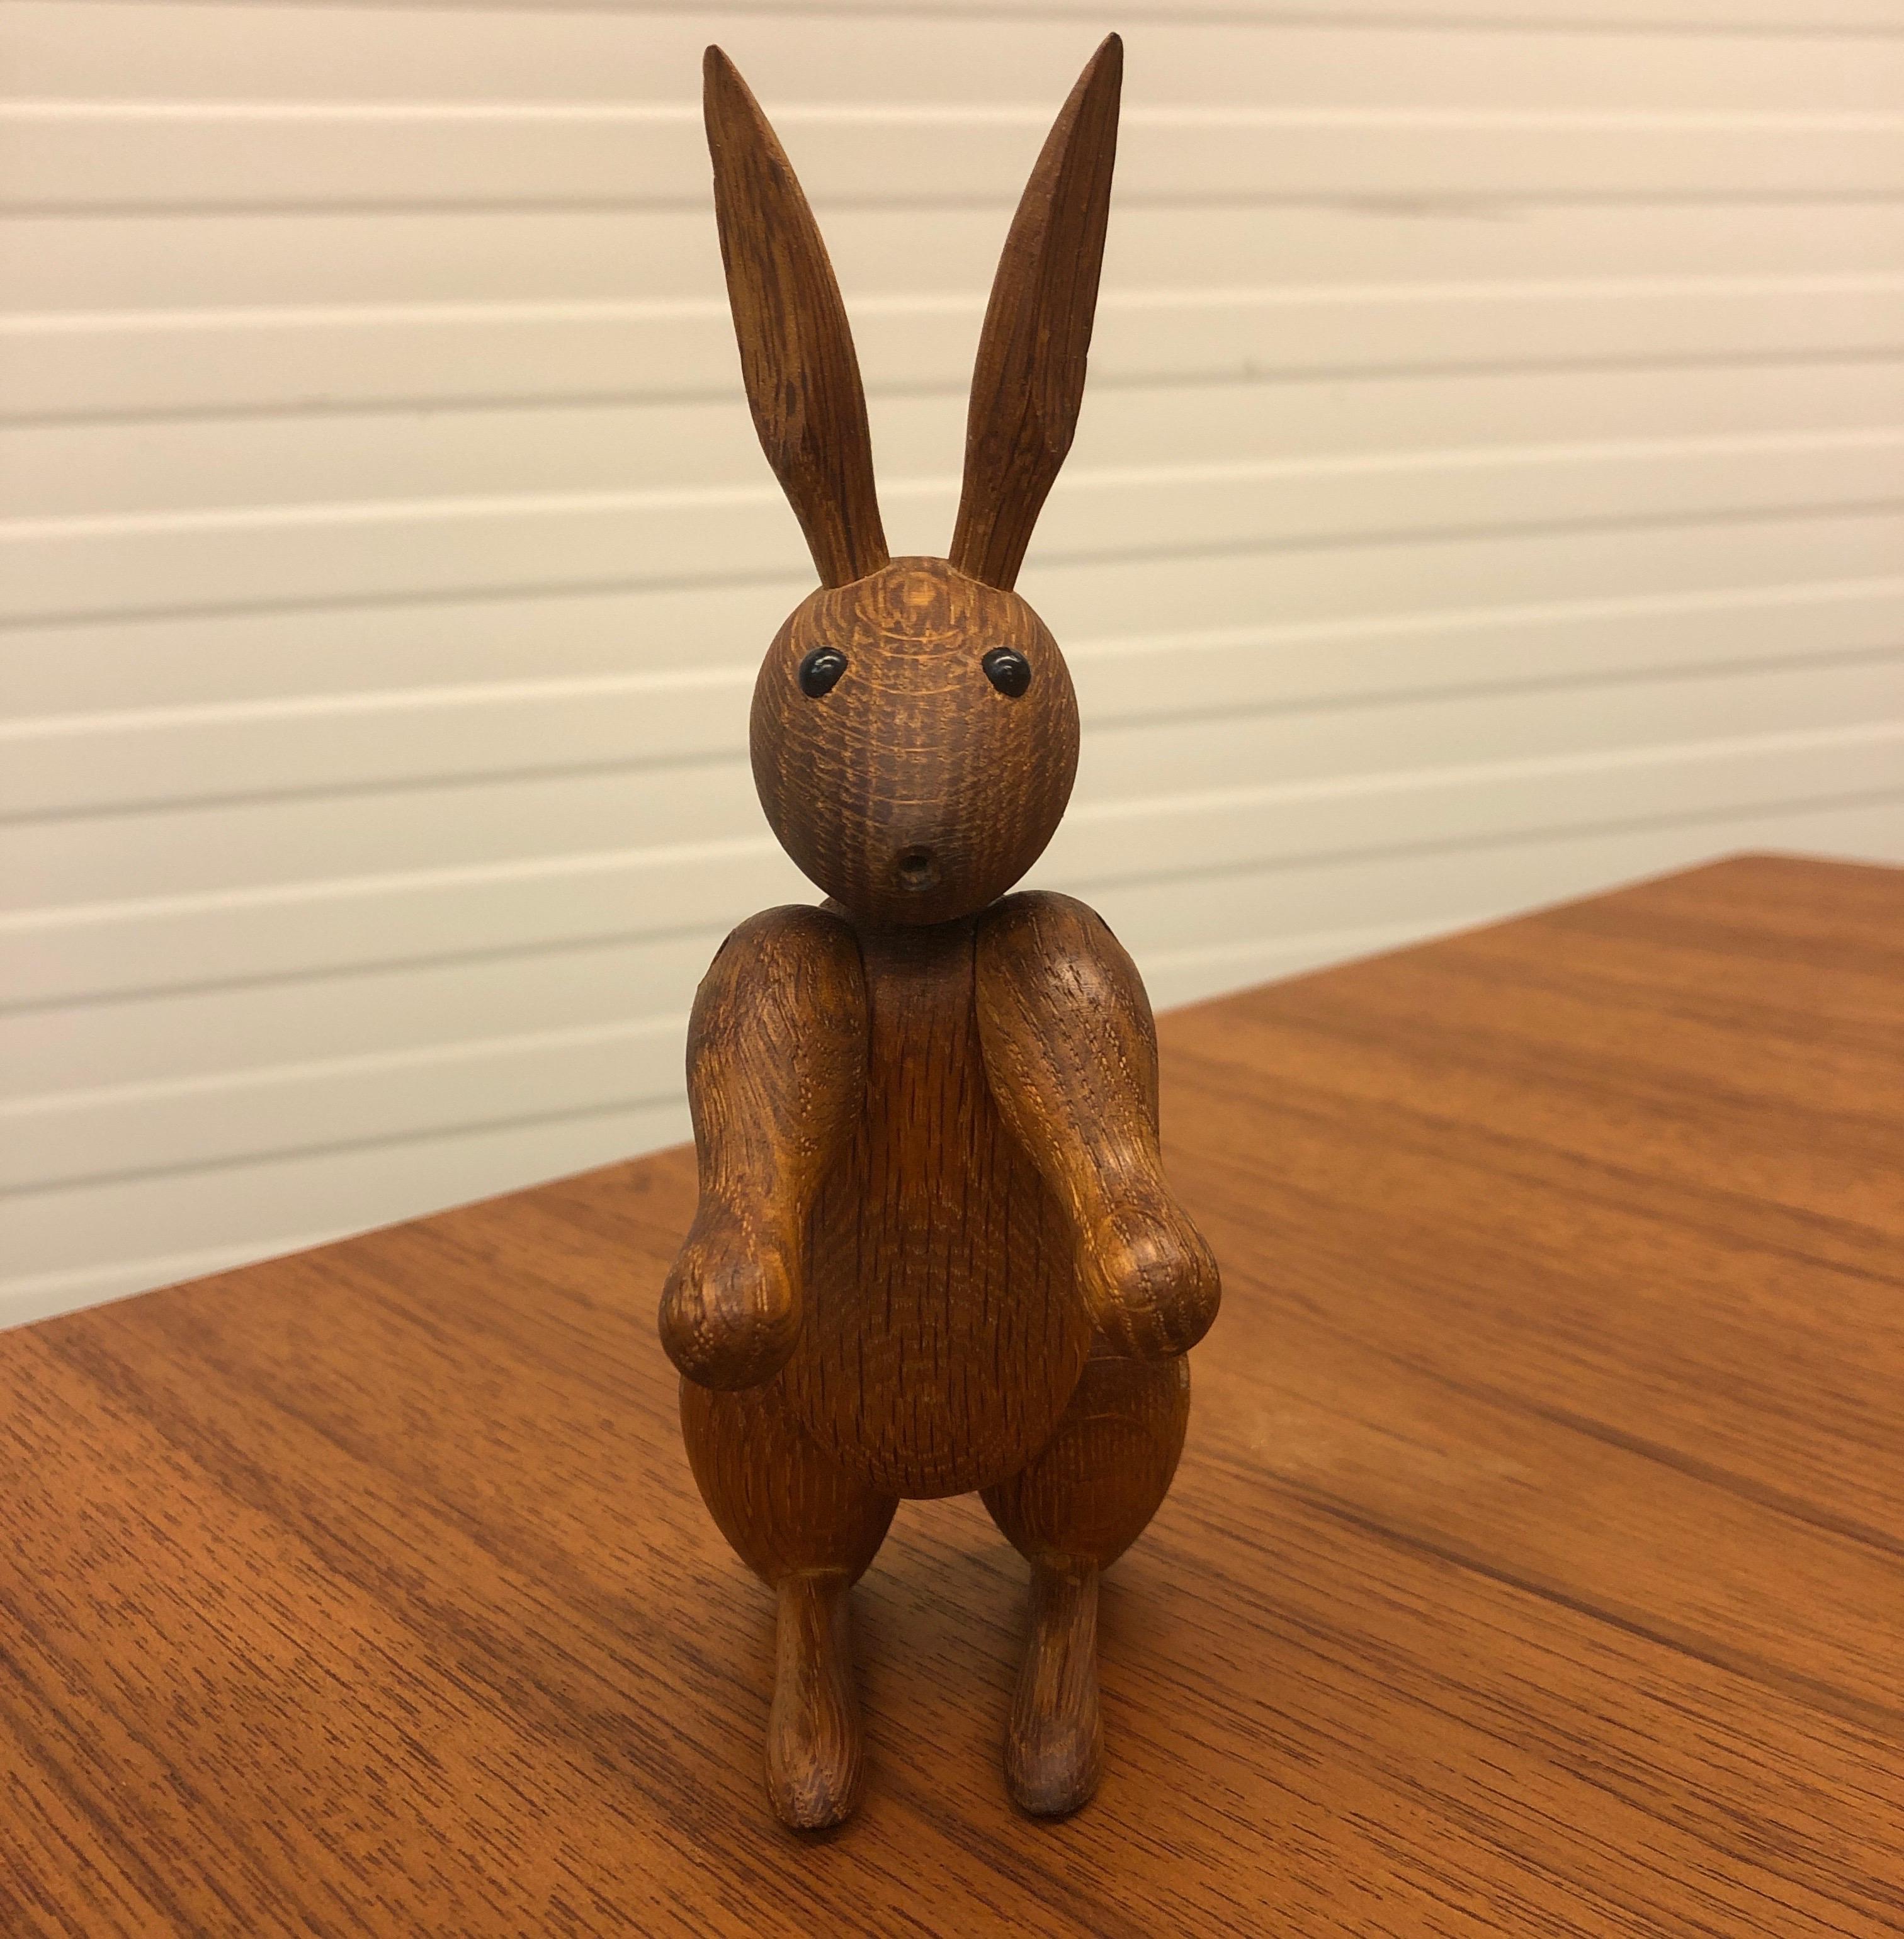 This little bunny was designed by Kay Bojesen in the 1950s and It's marked 